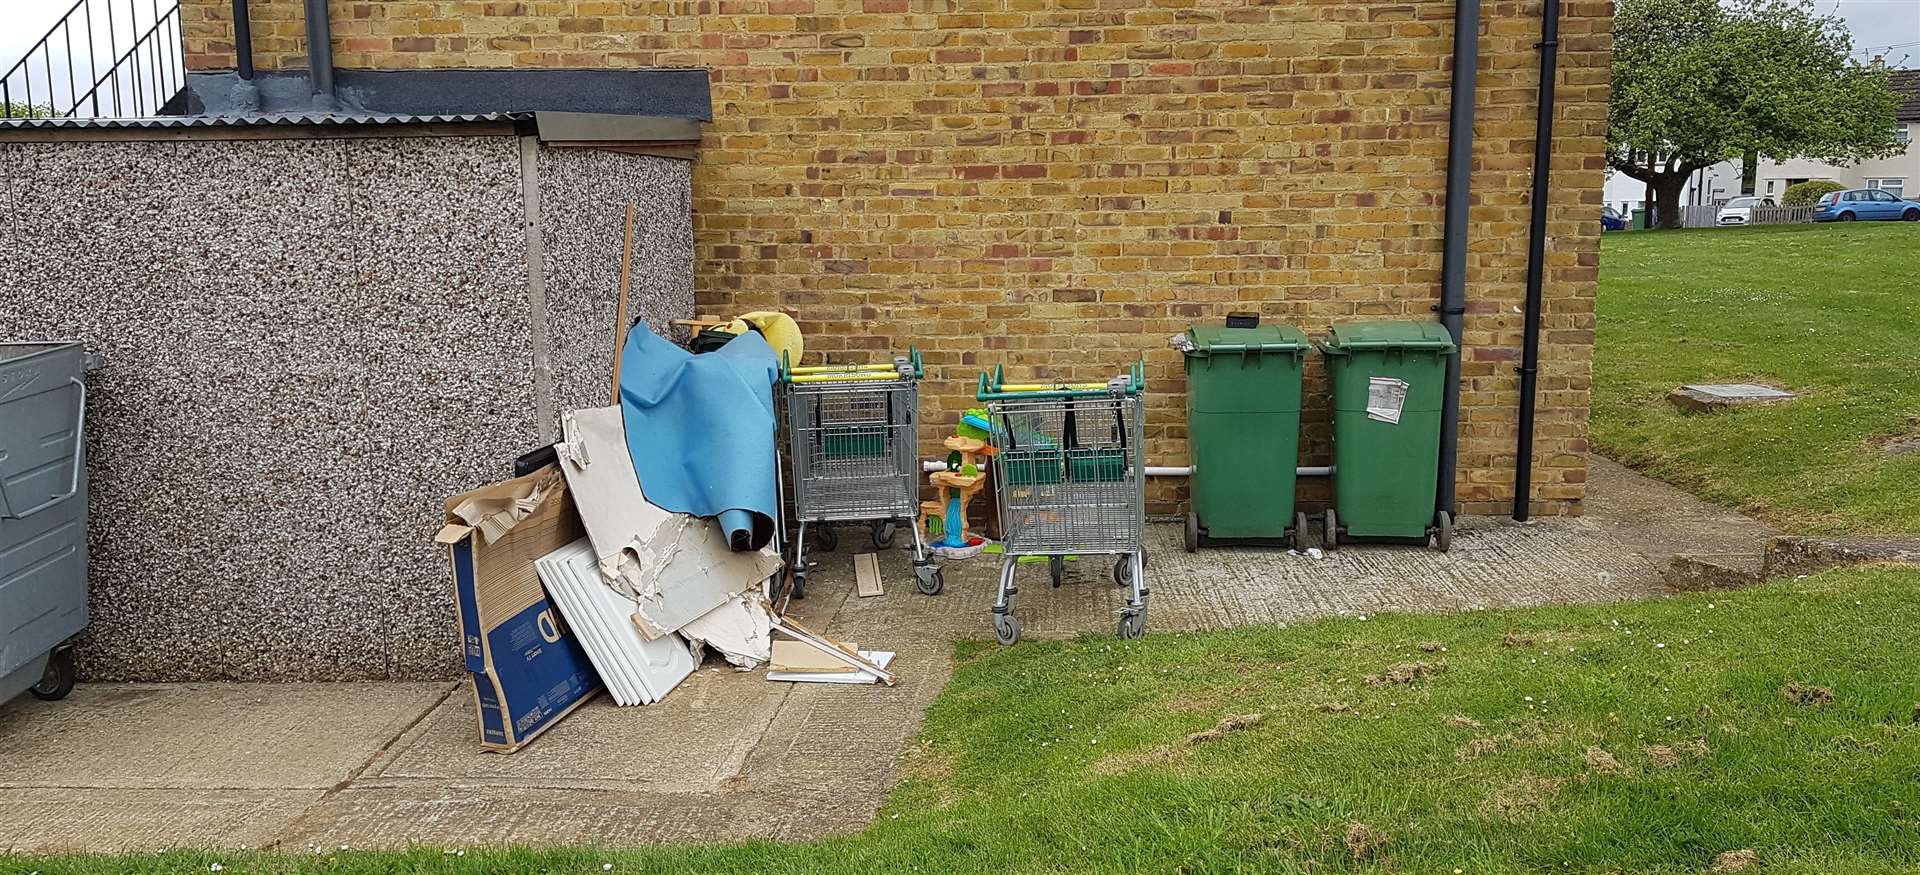 Areas in Cambridge Crescent in Shepway have been earmarked for regeneration by Golding Homes. Rubbish and discarded shopping trolleys were a common sight